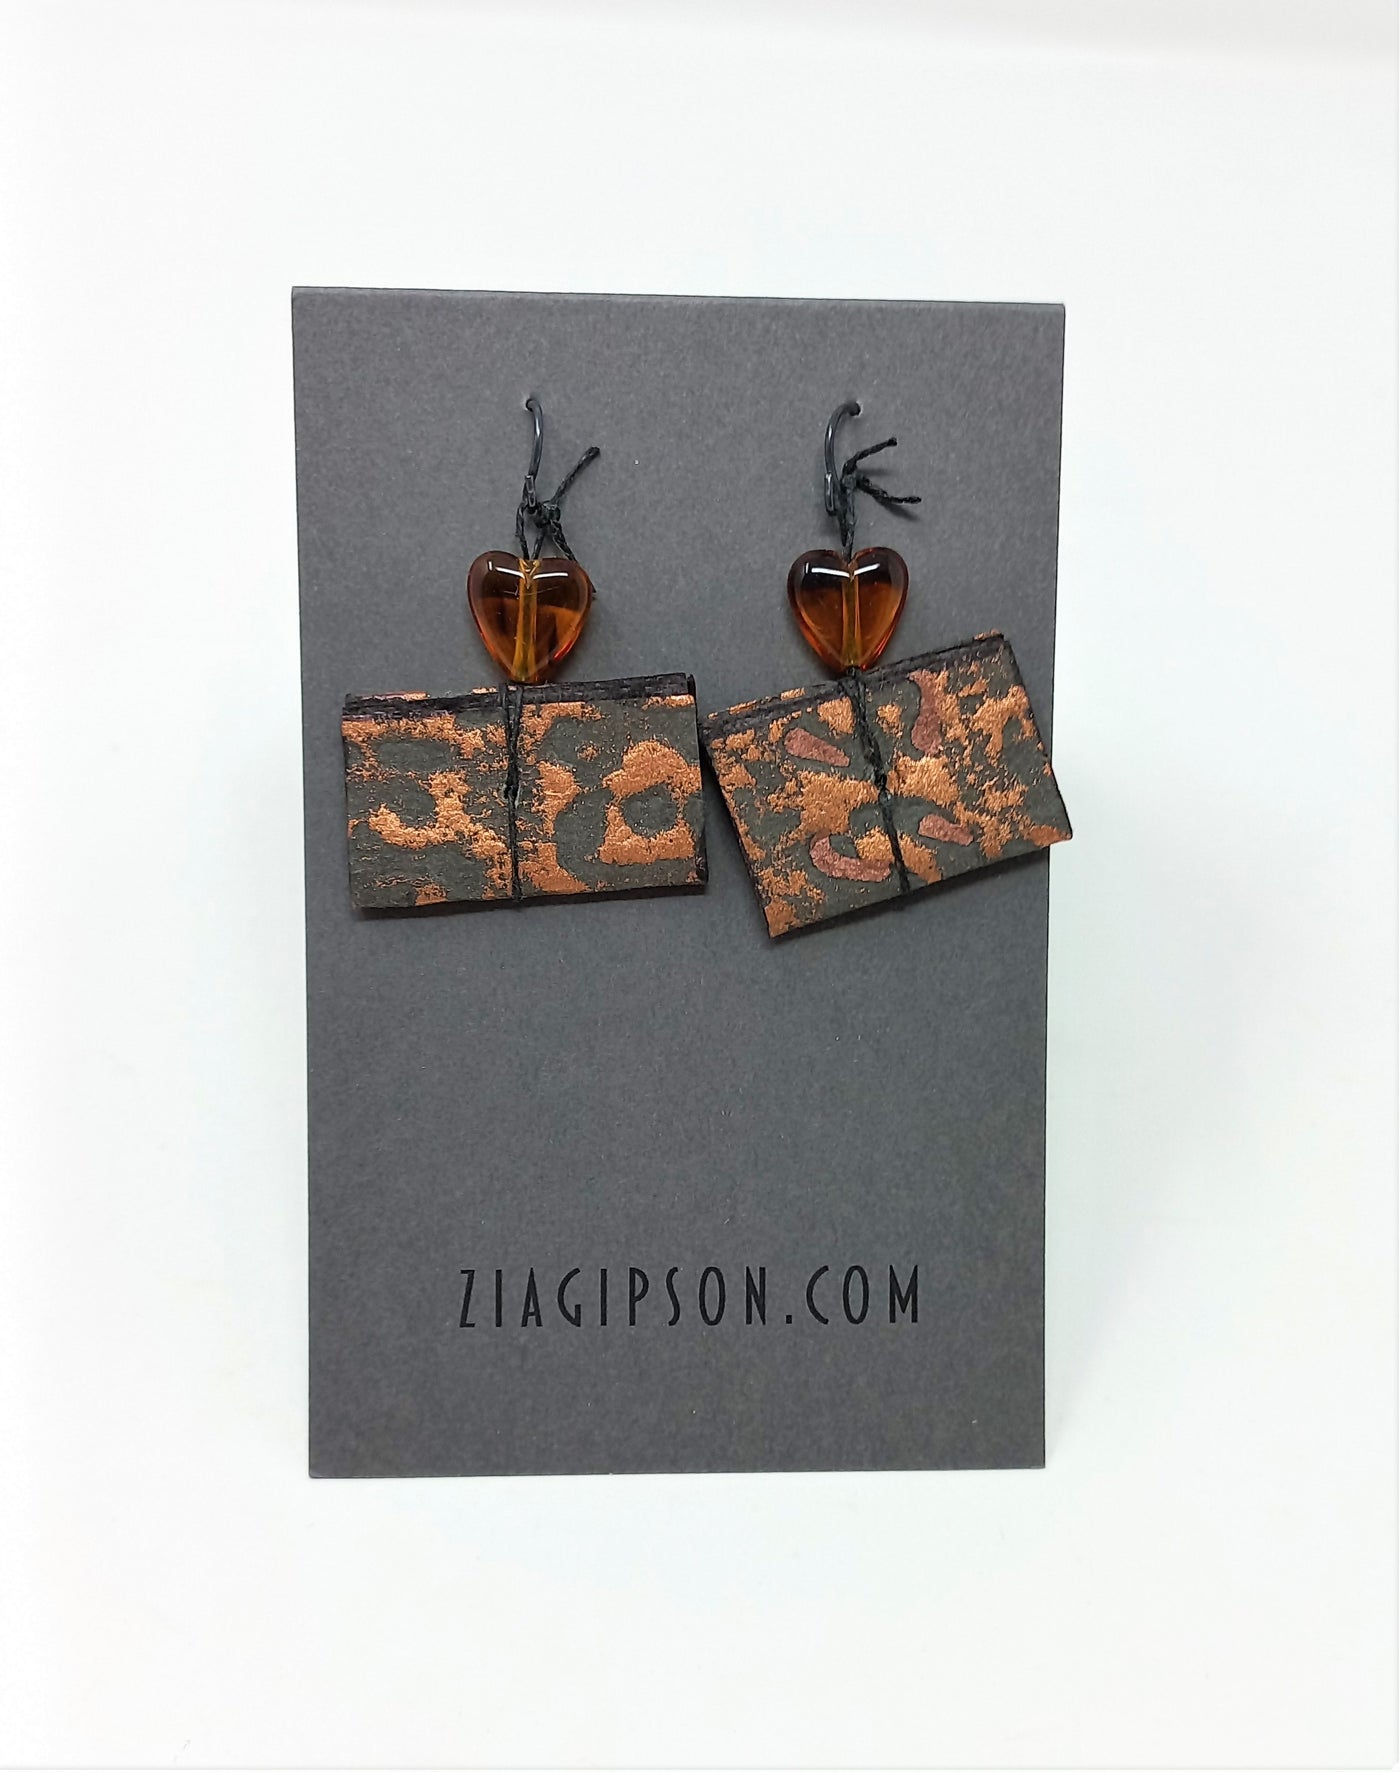 Bronze and Black with Amber hearts Earrings by Zia Gipson